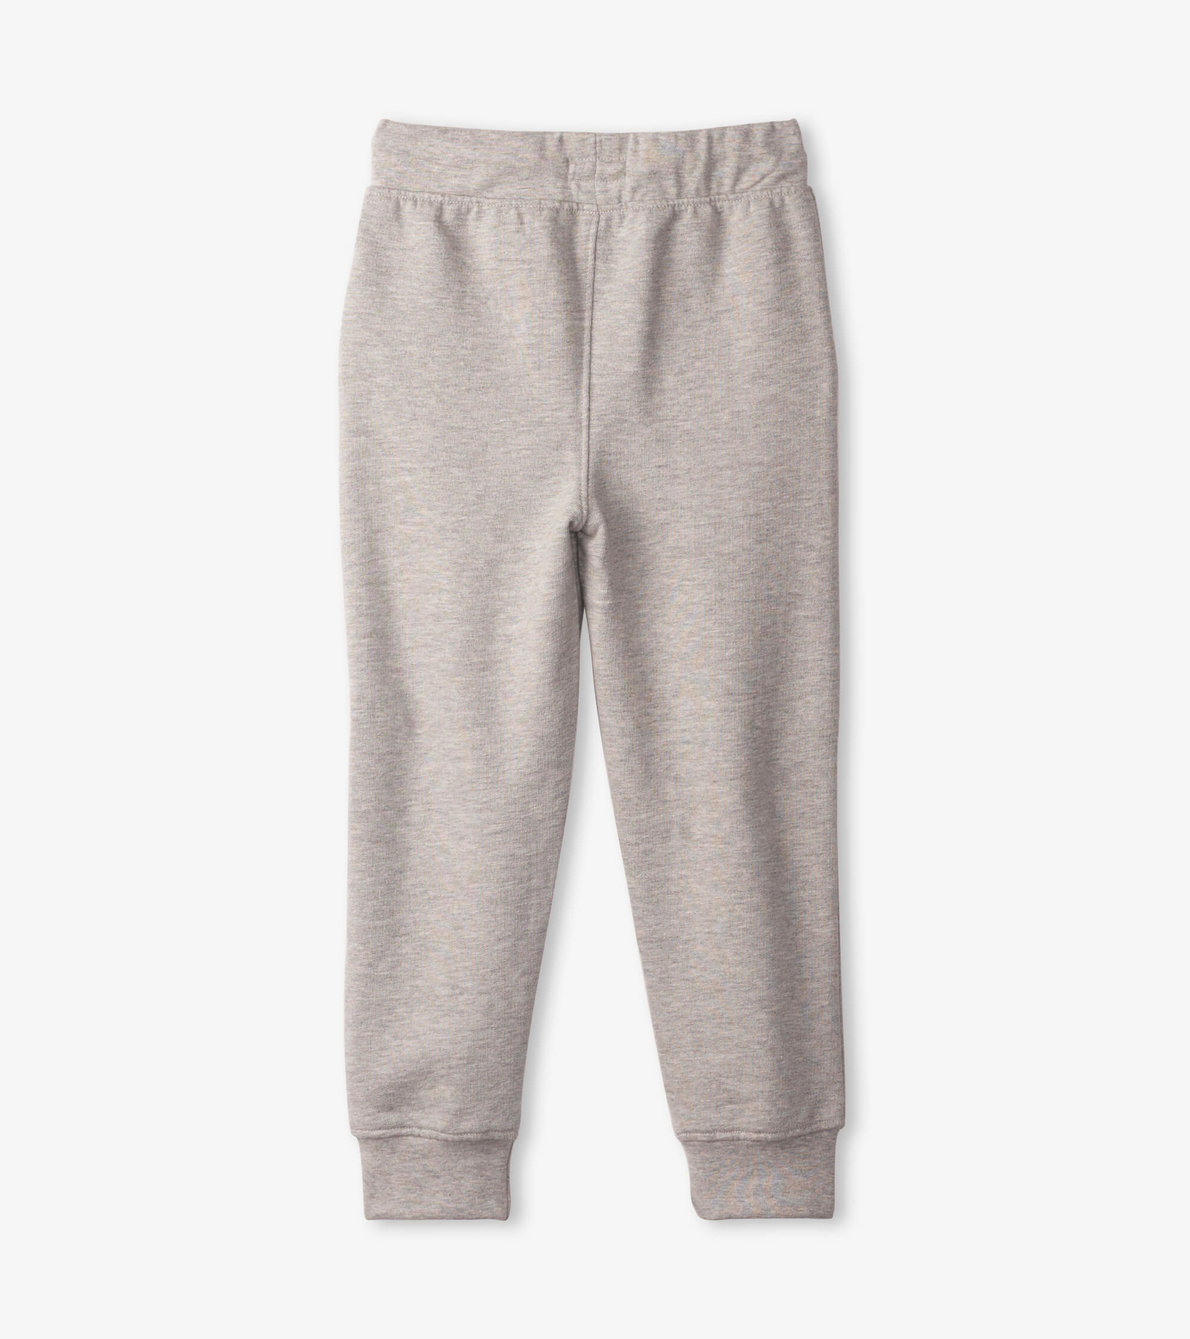 View larger image of Athletic Grey Slim Fit Joggers